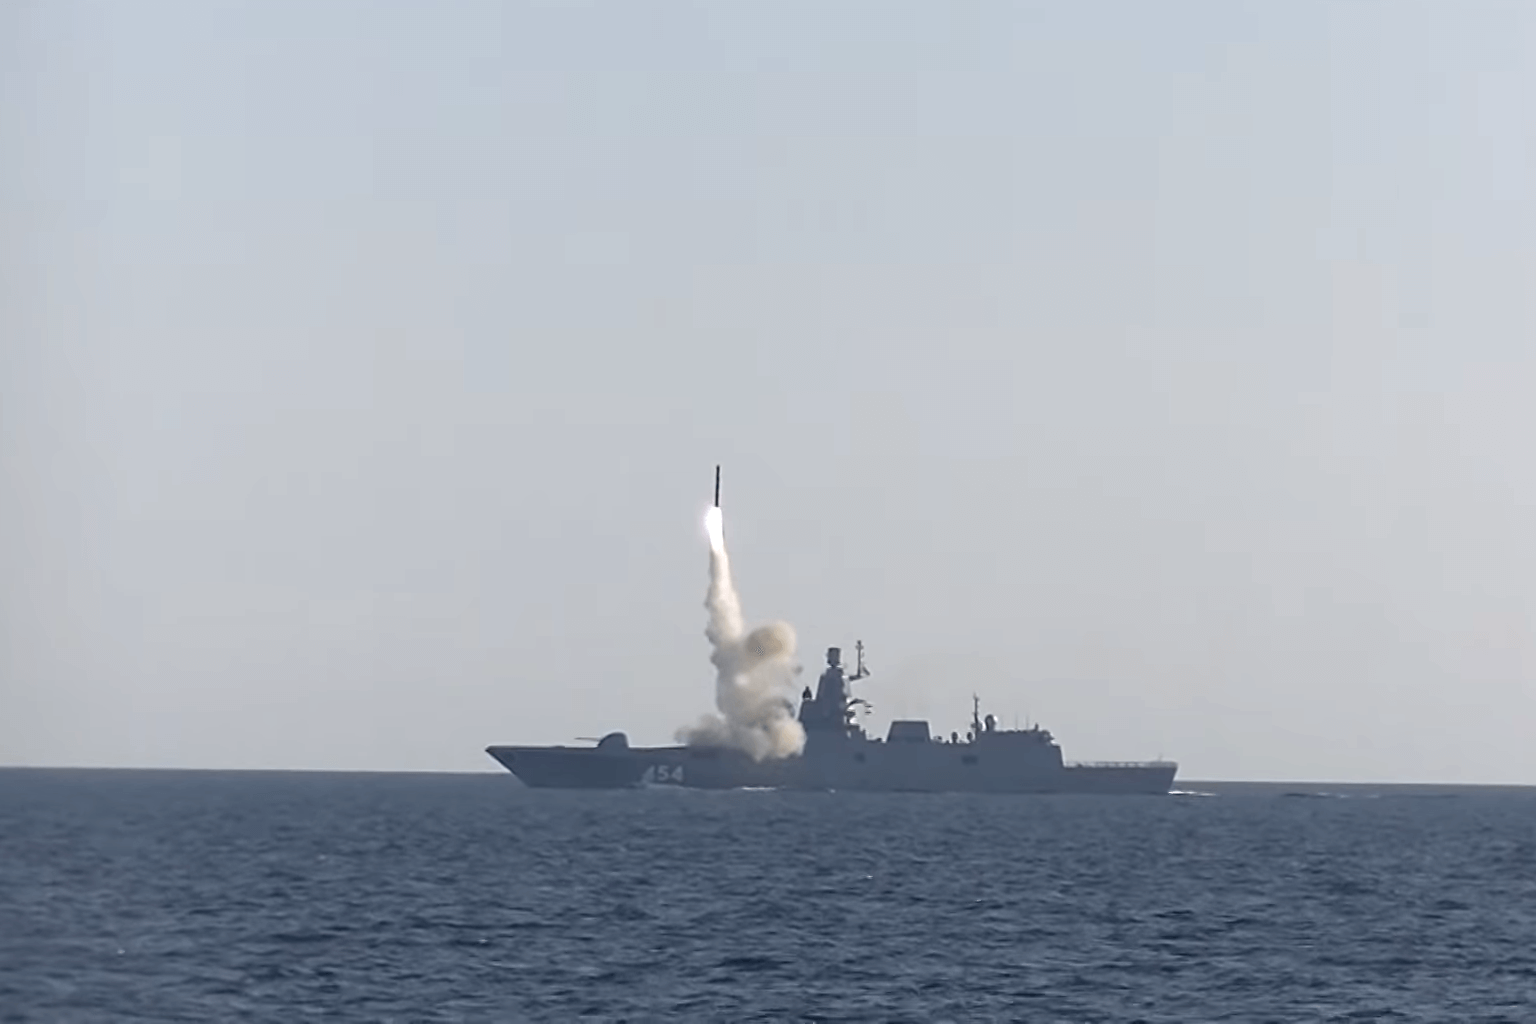 Russian Navy Admiral Gorshkov Frigate Successfully Test-fired Zircon Anti-ship Hypersonic Missile